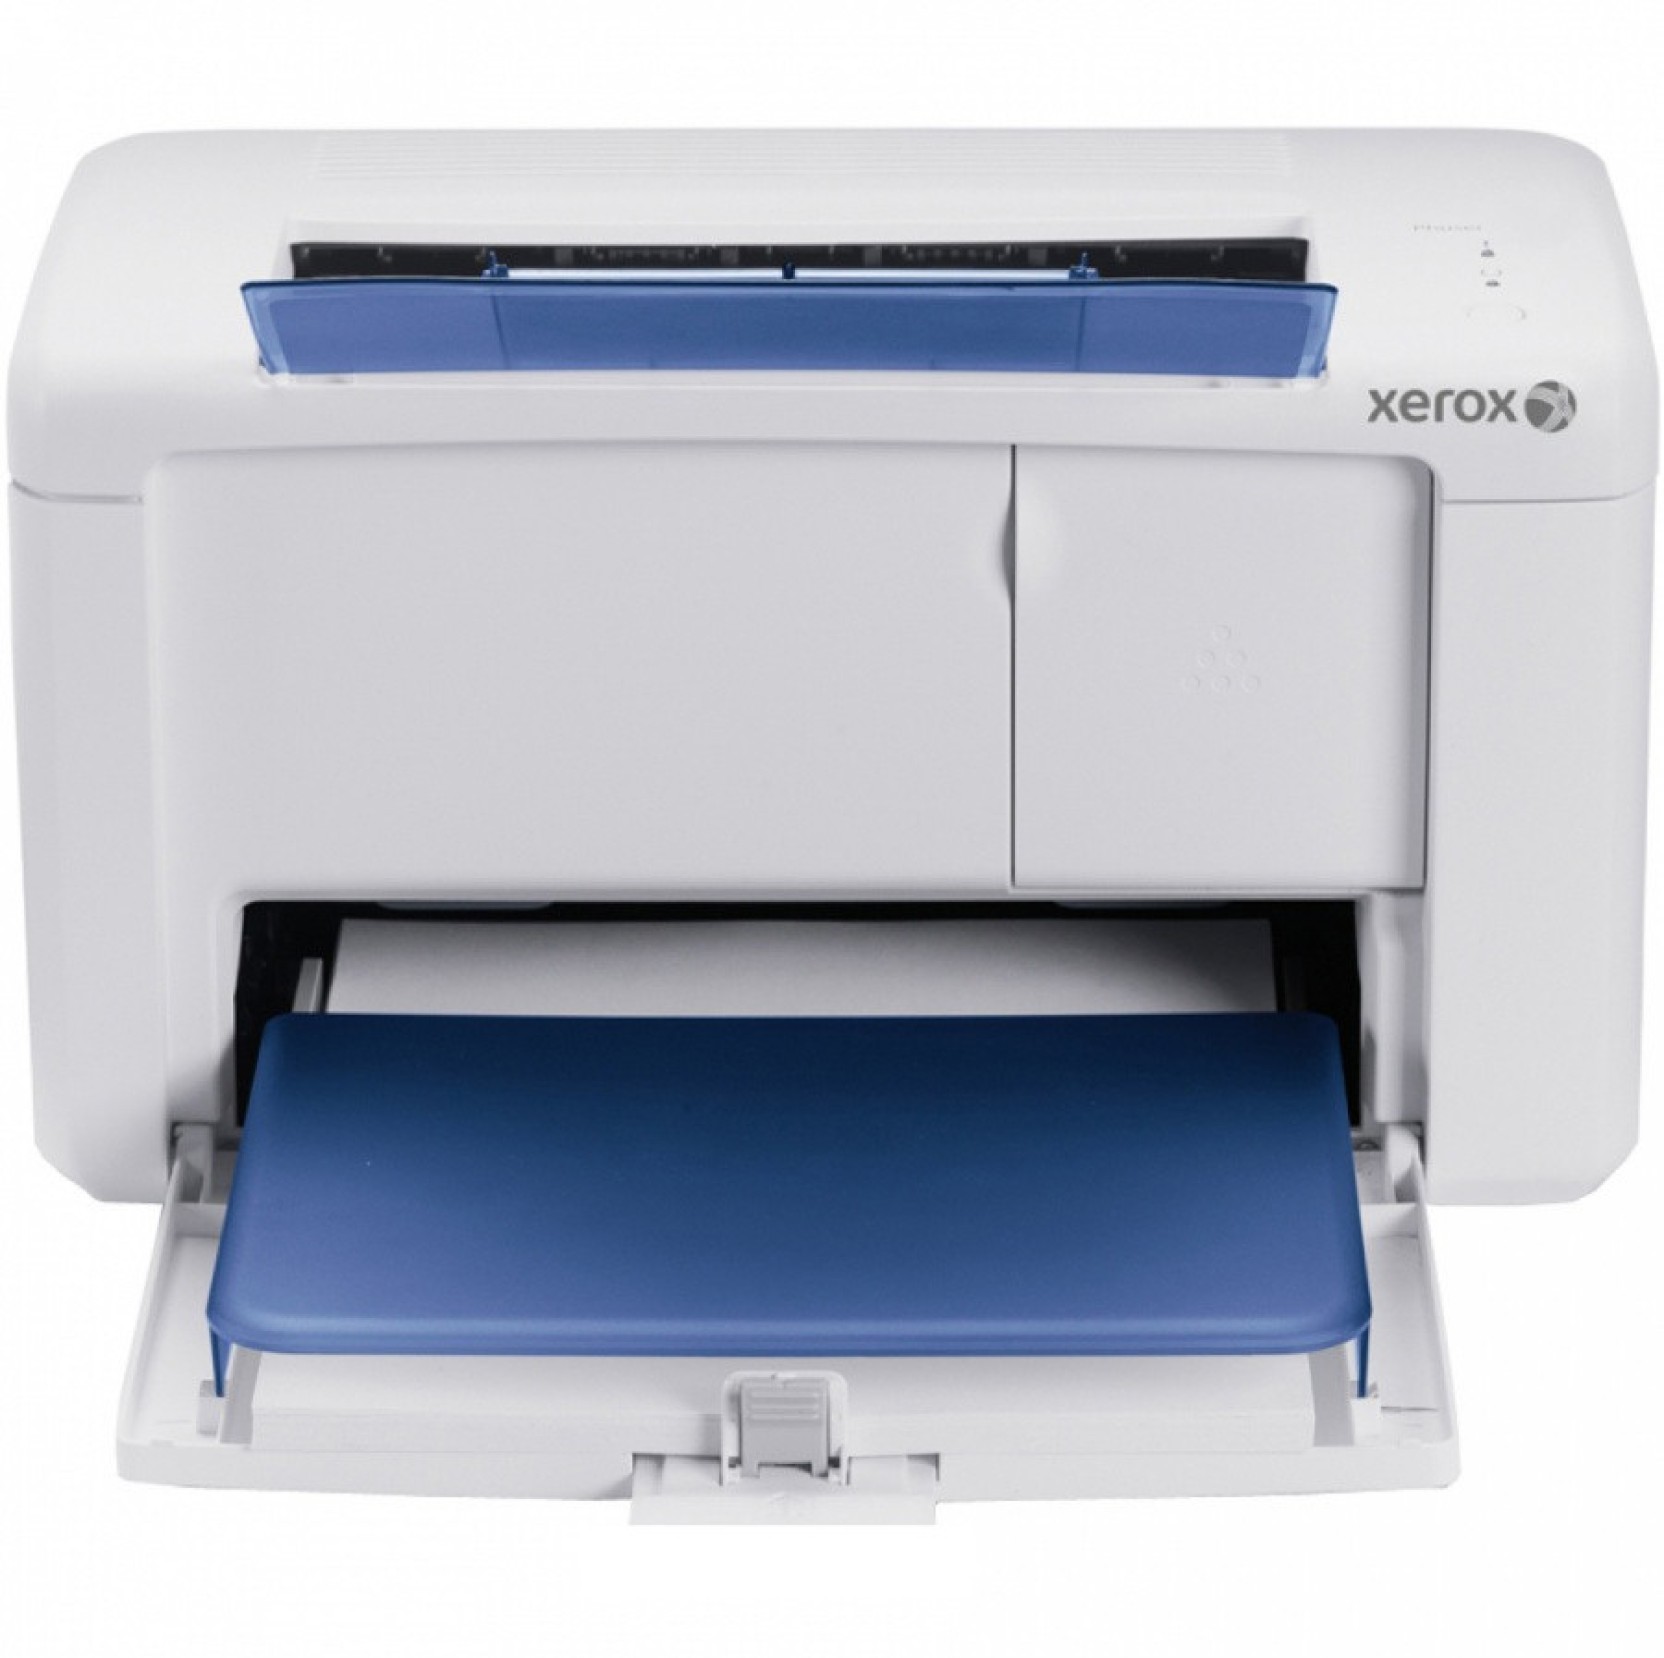 Xerox phaser 3010 specification